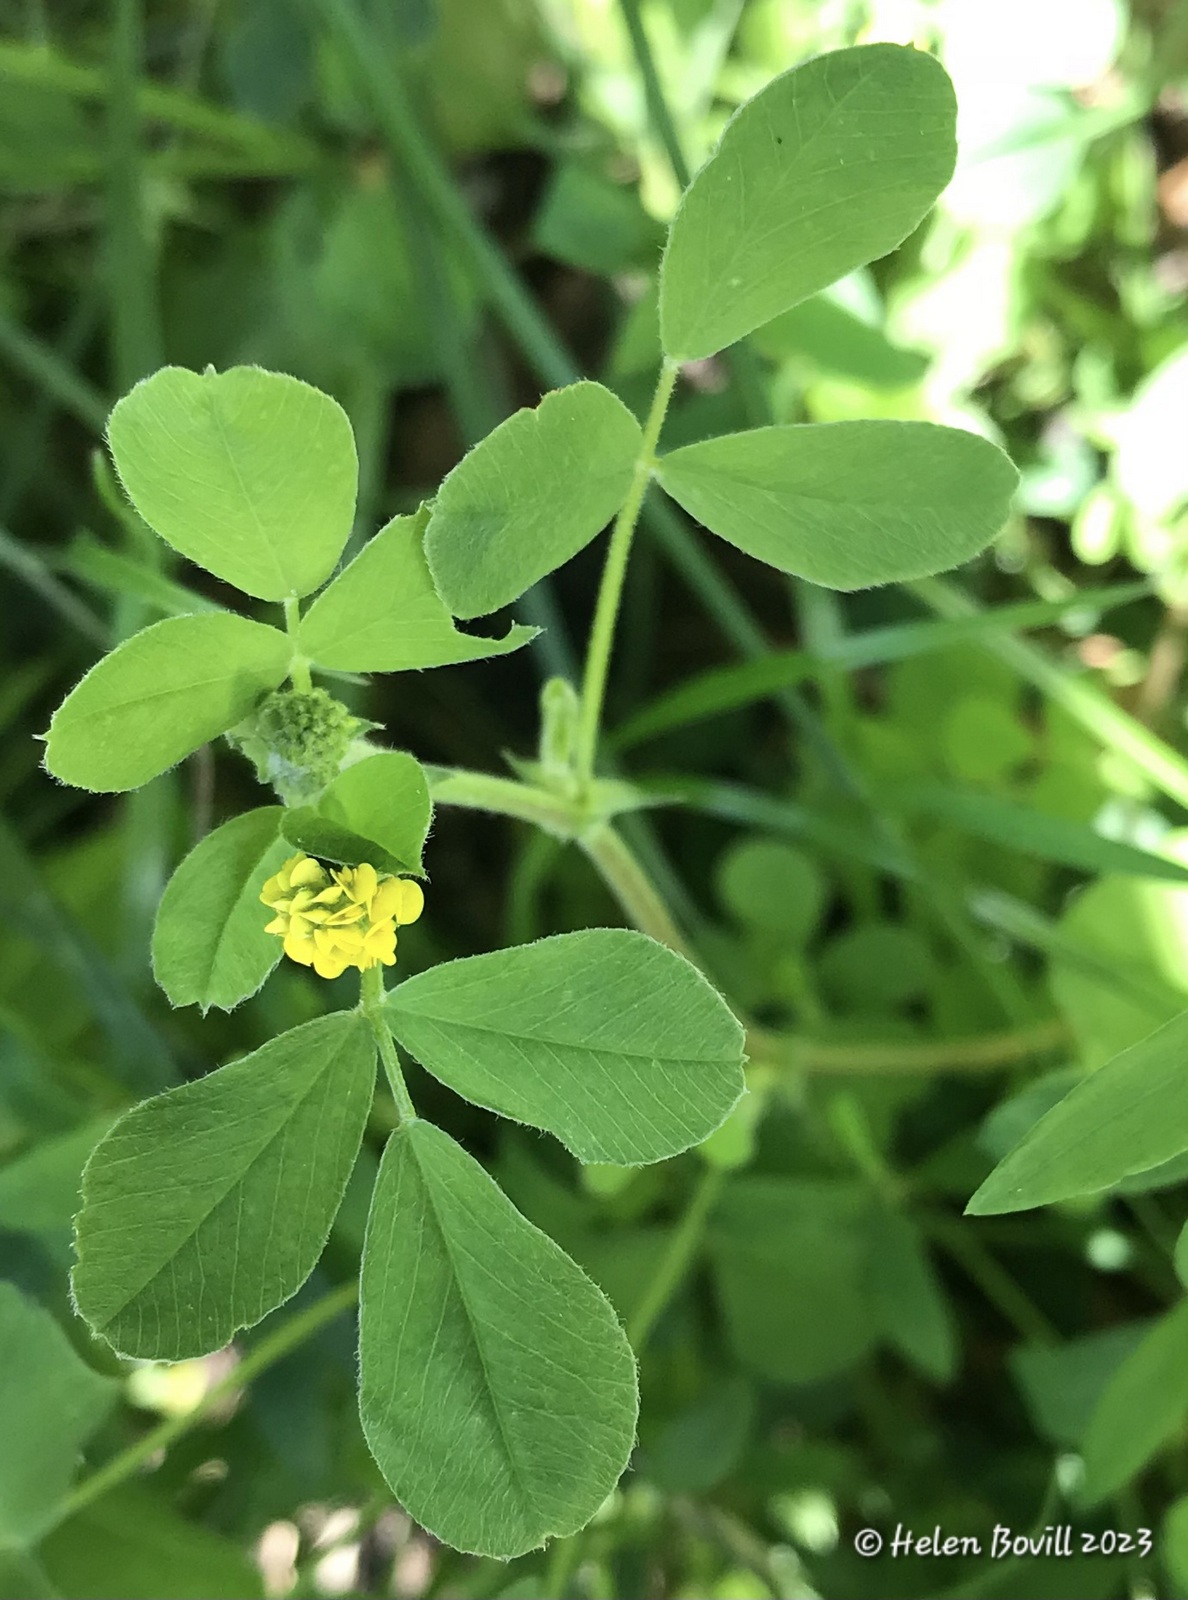 The tiny yellow flower of the Black Medick, with clover-like green leaves